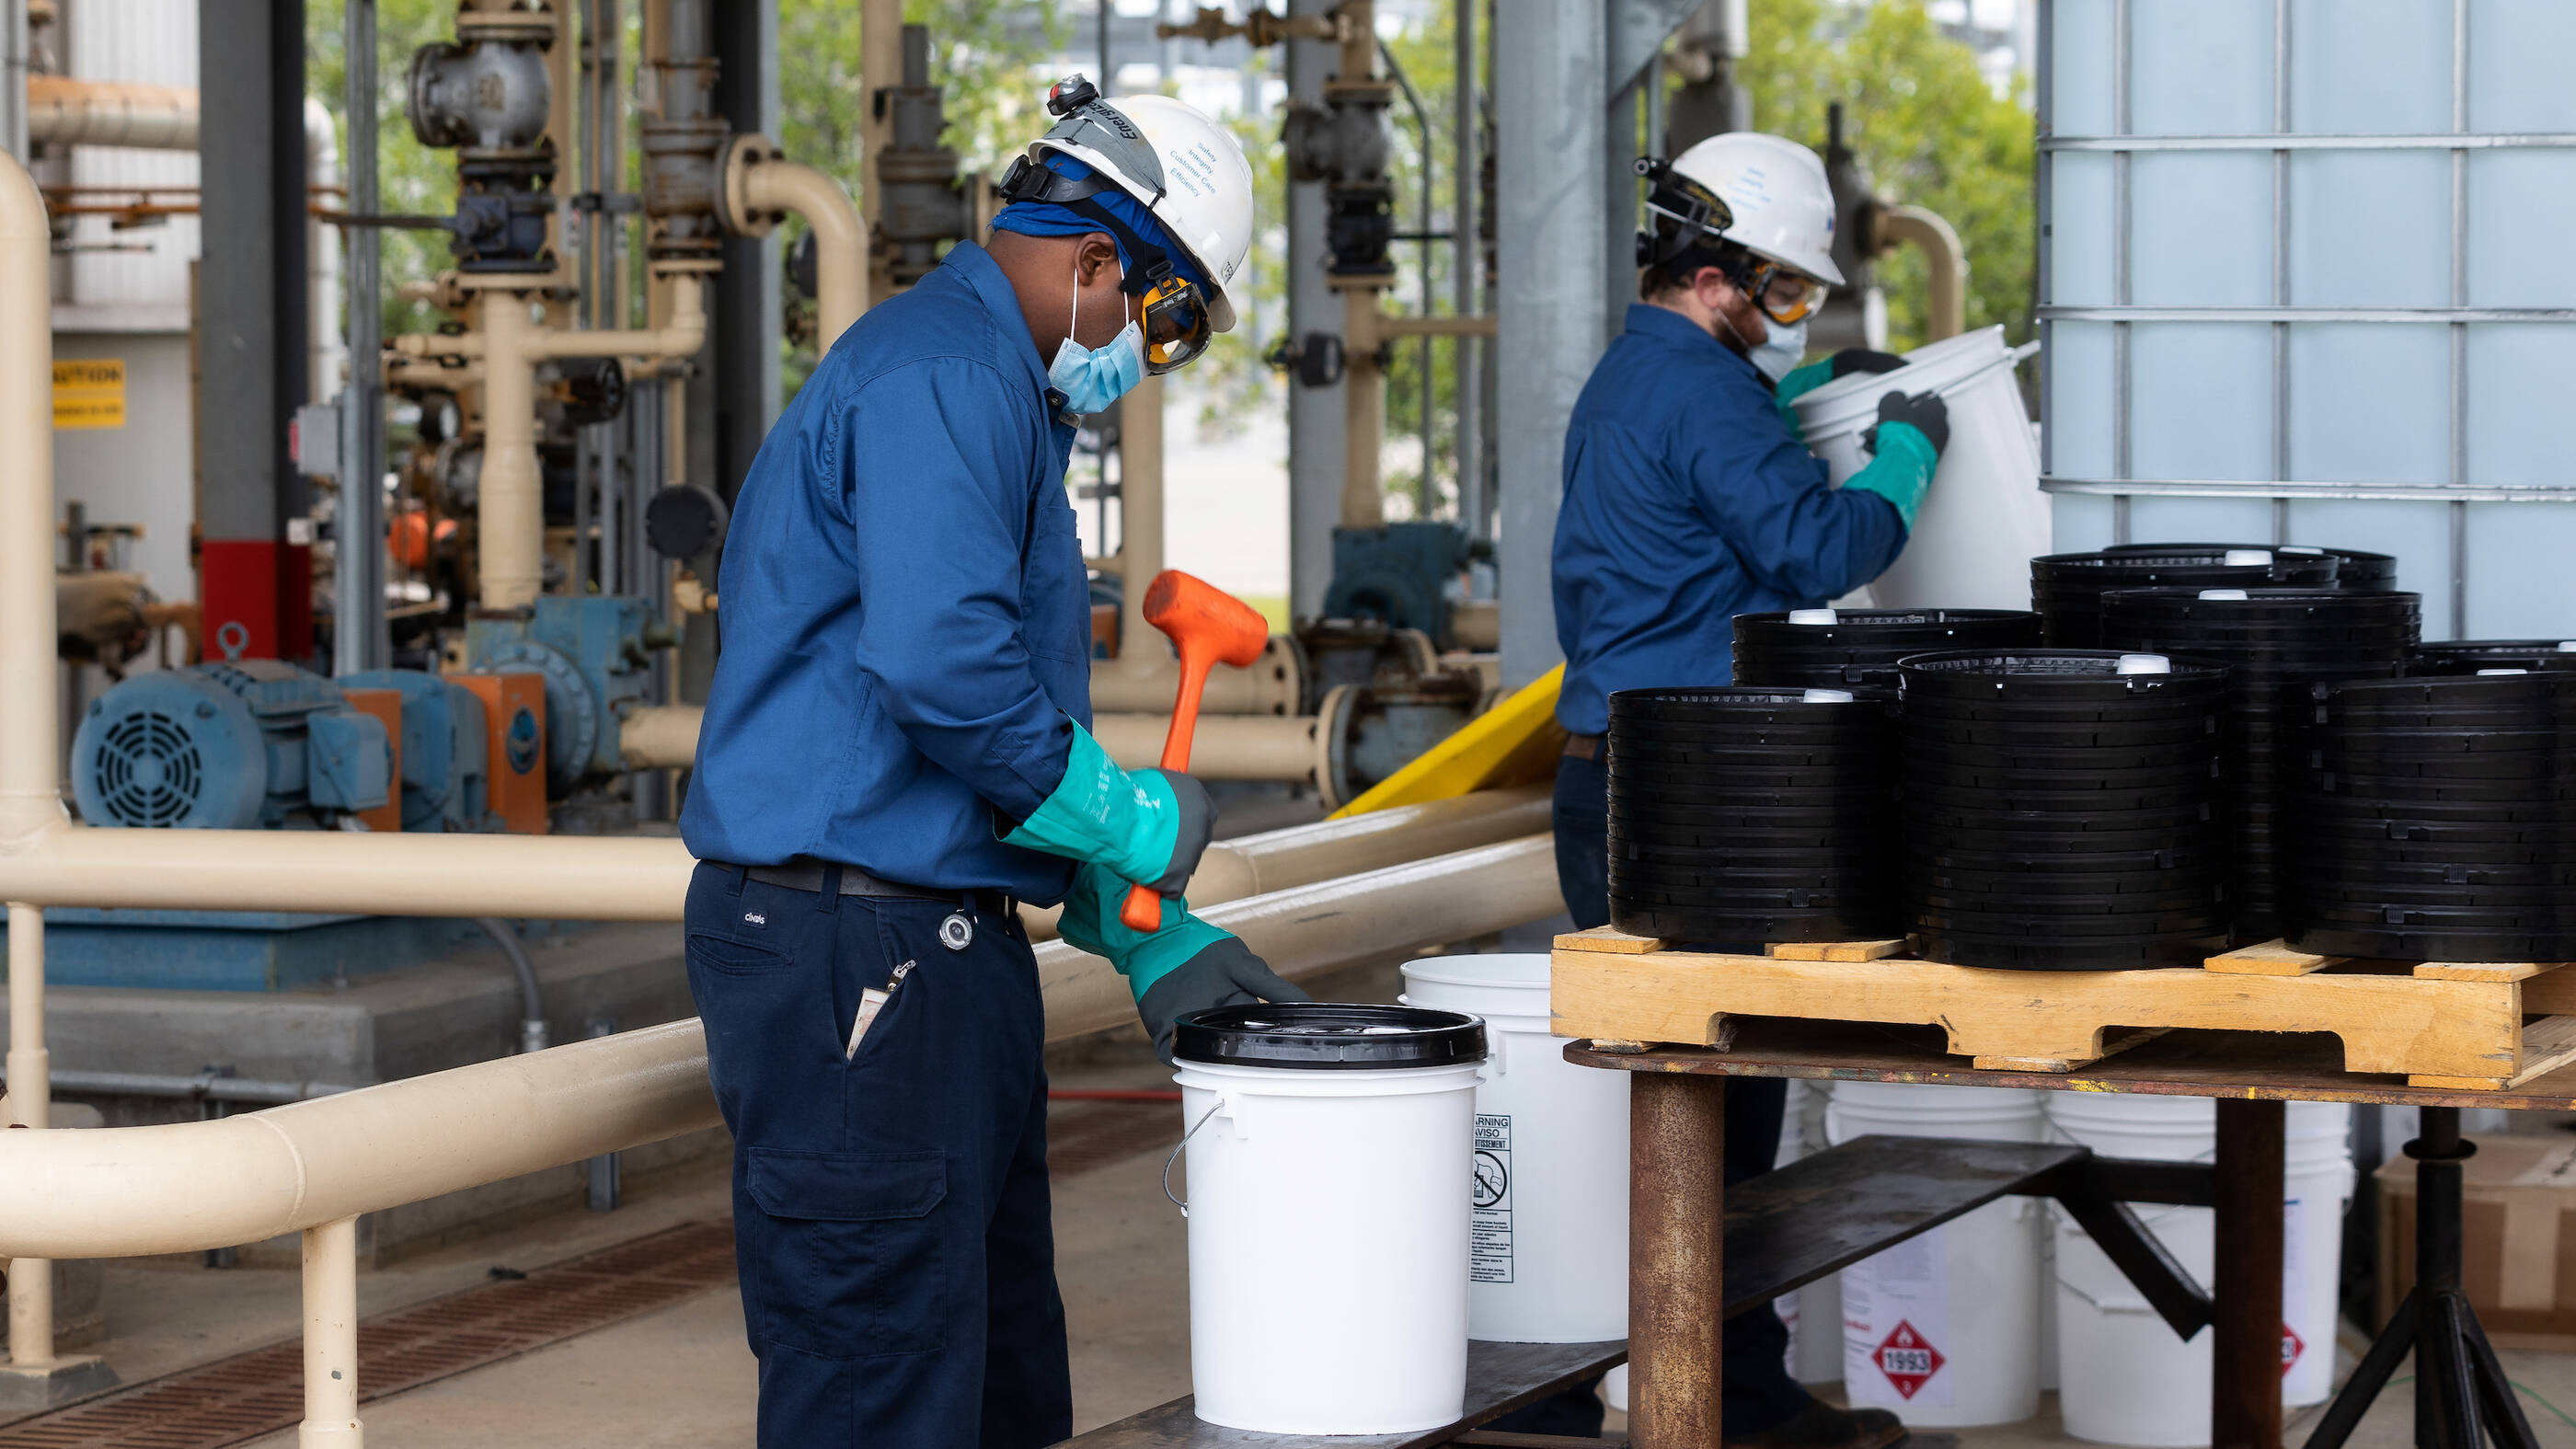 To enhance safety, ExxonMobil plant personnel package the sanitizers outdoors. The new manufacturing process upholds all safety requirements and the consumer-ready product meets FDA standards.